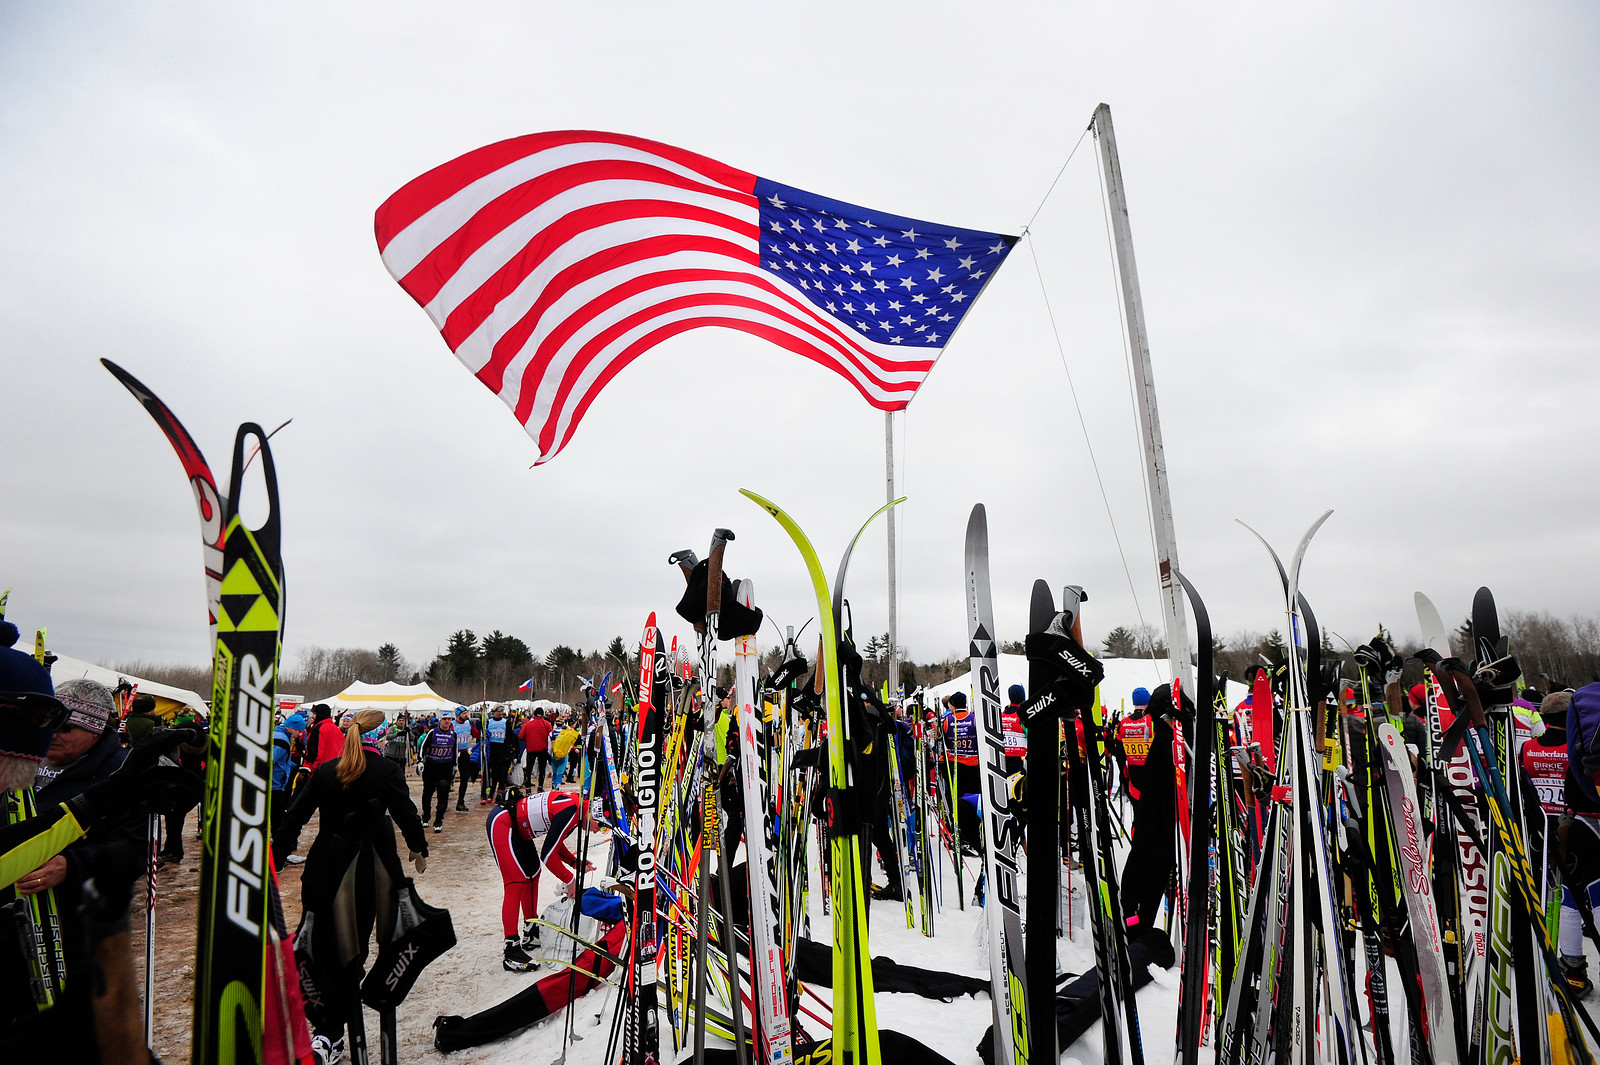 Ski racing in America: nonetheless packed and enthusiastic, even when it's 32 degrees and raining. (Photo: USSA/Tom Kelly)